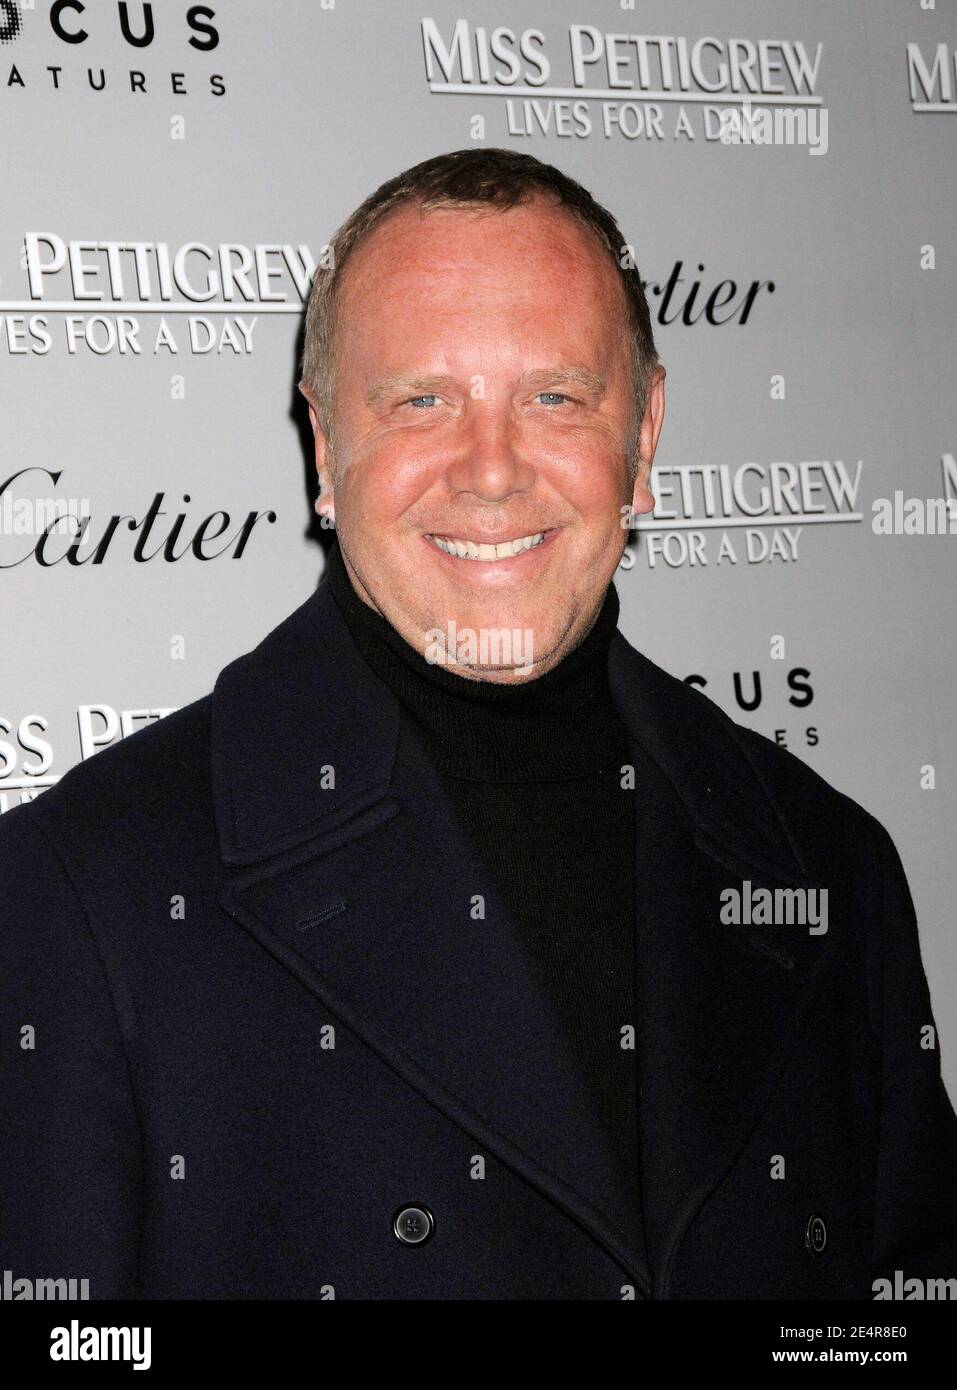 forskellige Tag væk overvåge Designer Michael Kors arriving for the New York special screening of 'Miss  Pettigrew Lives For a Day' held at the Tribeca Grand Screening Room in New  York City, NY, USA on March